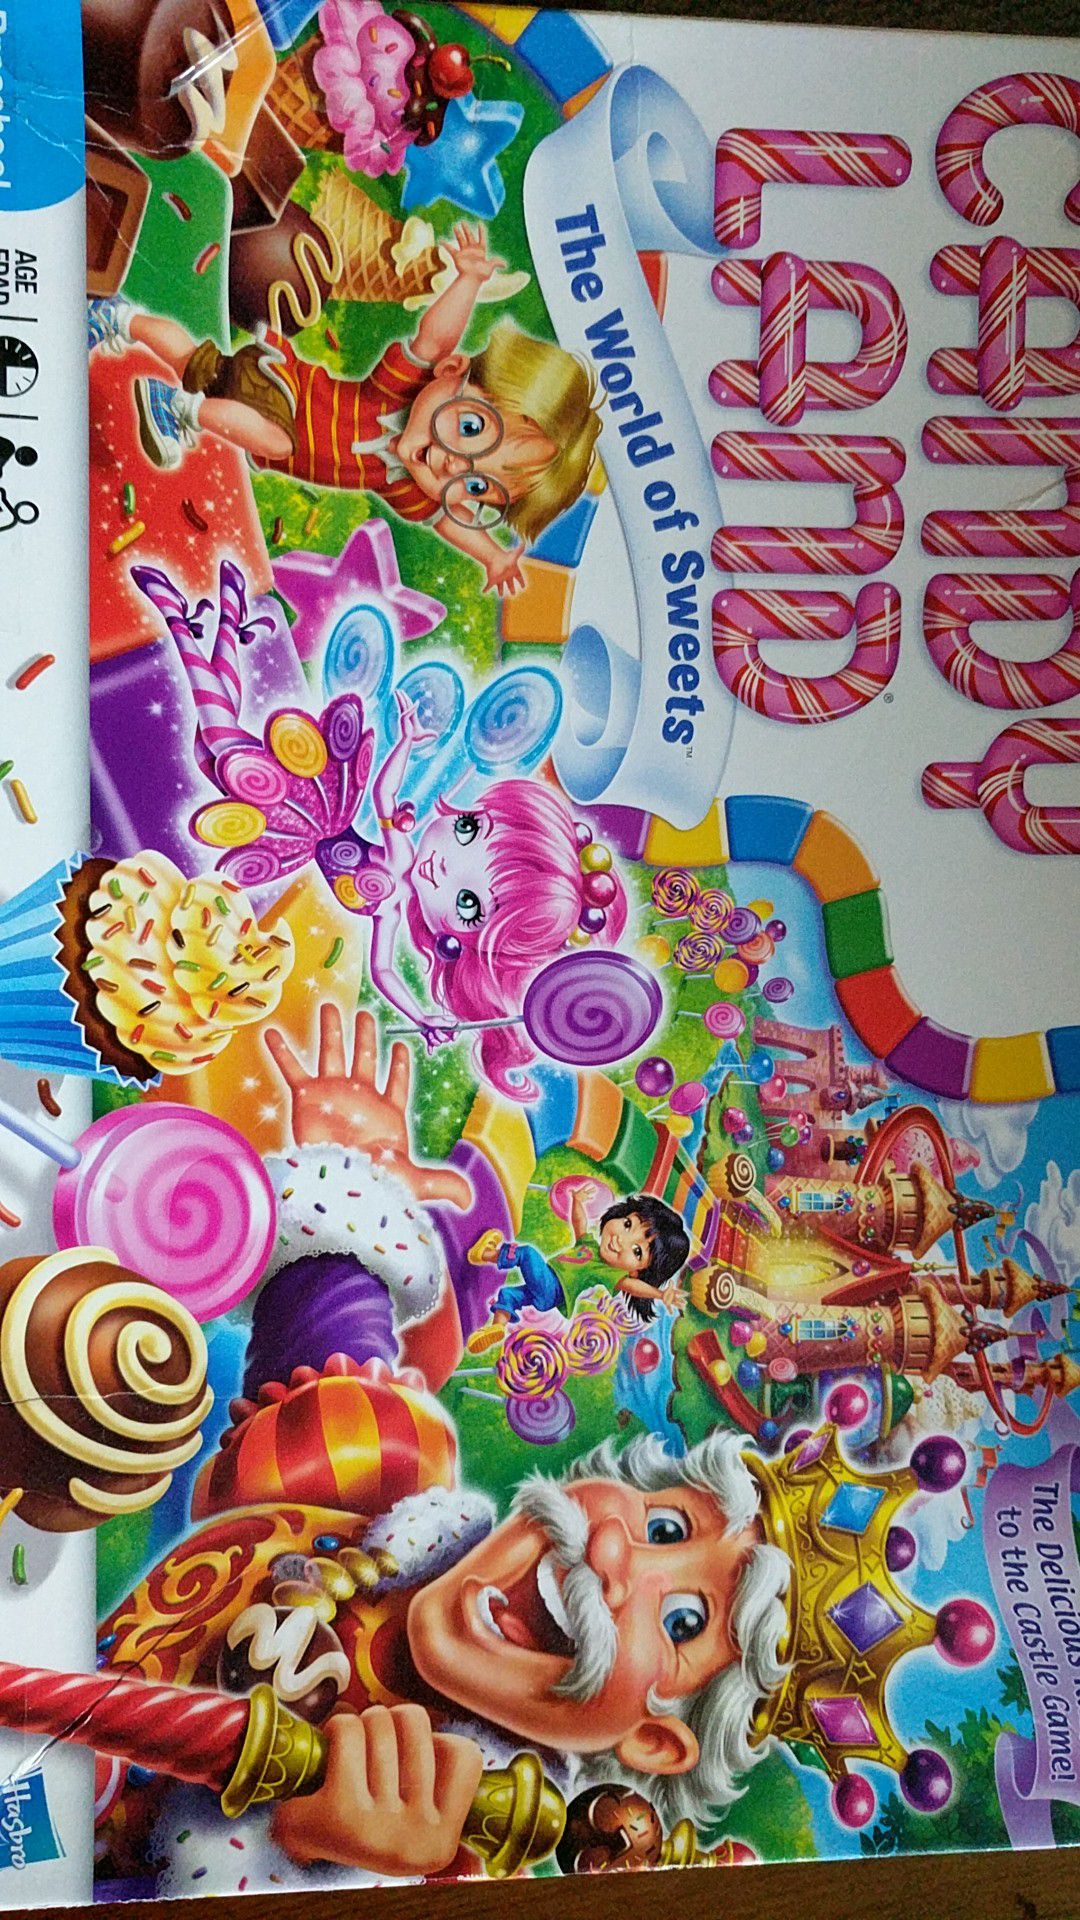 Candy land board game